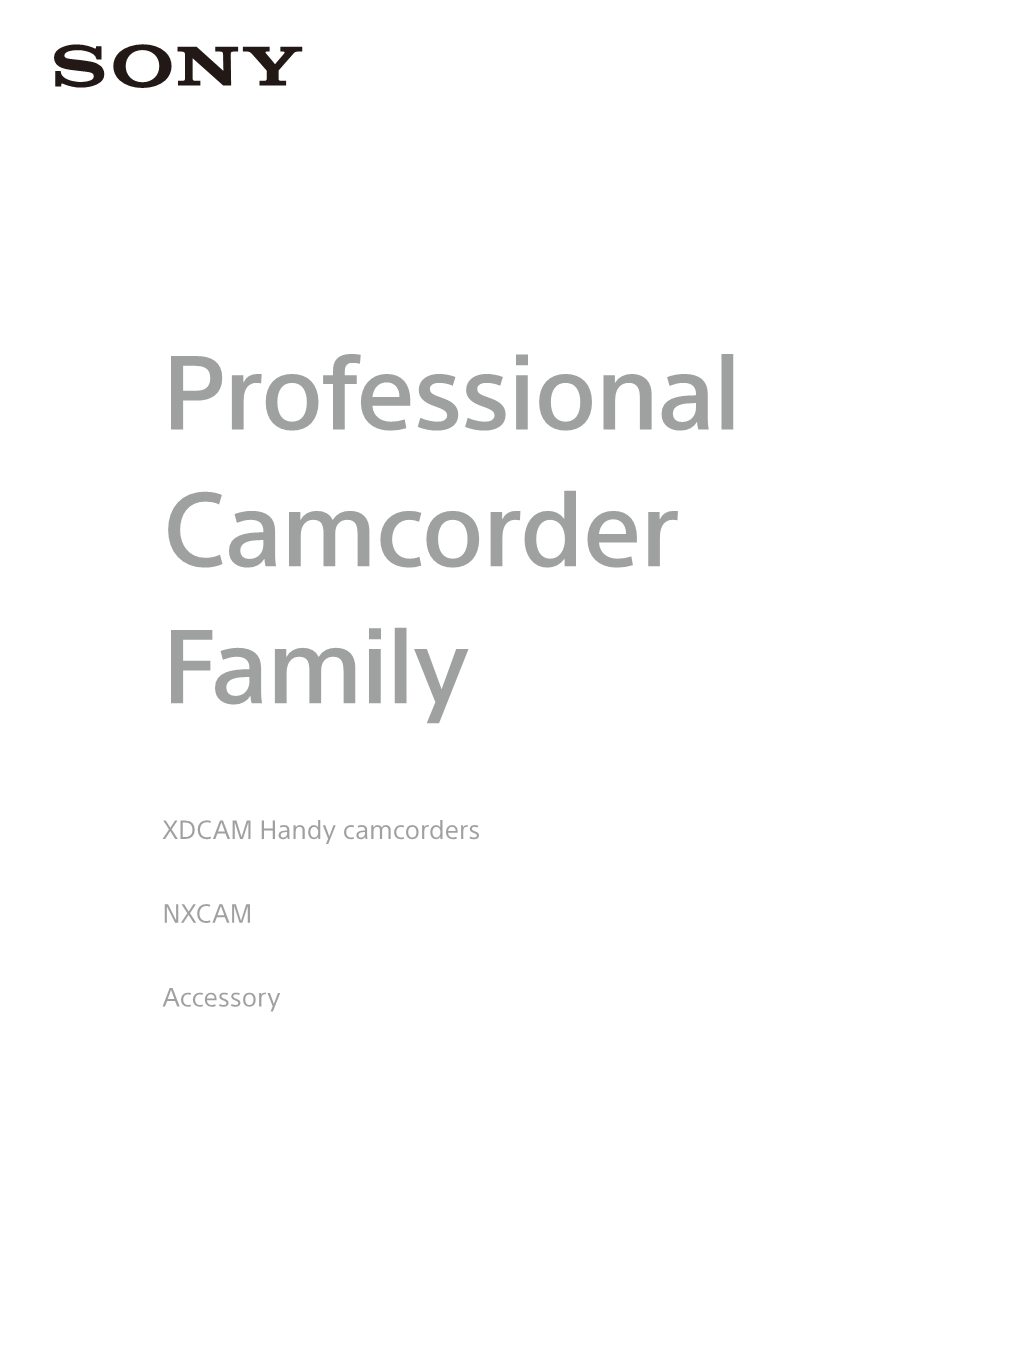 Sony Professional Camcorder Family